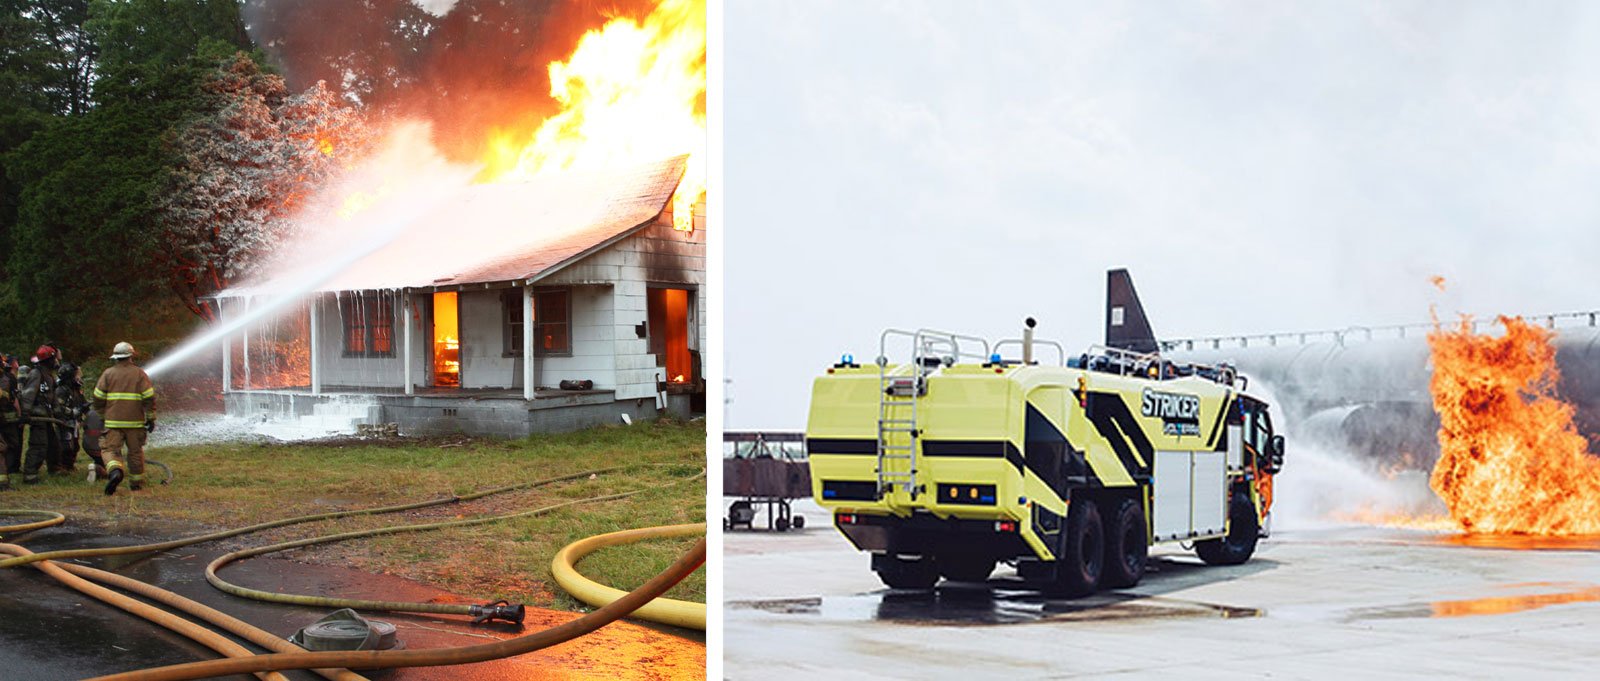 A side-by-side image of fire suppressions systems shows municipal firefighters using foam to put out a fire at a house and a yellow and black ARFF vehicle using foam to put out a fire on an airplane. 